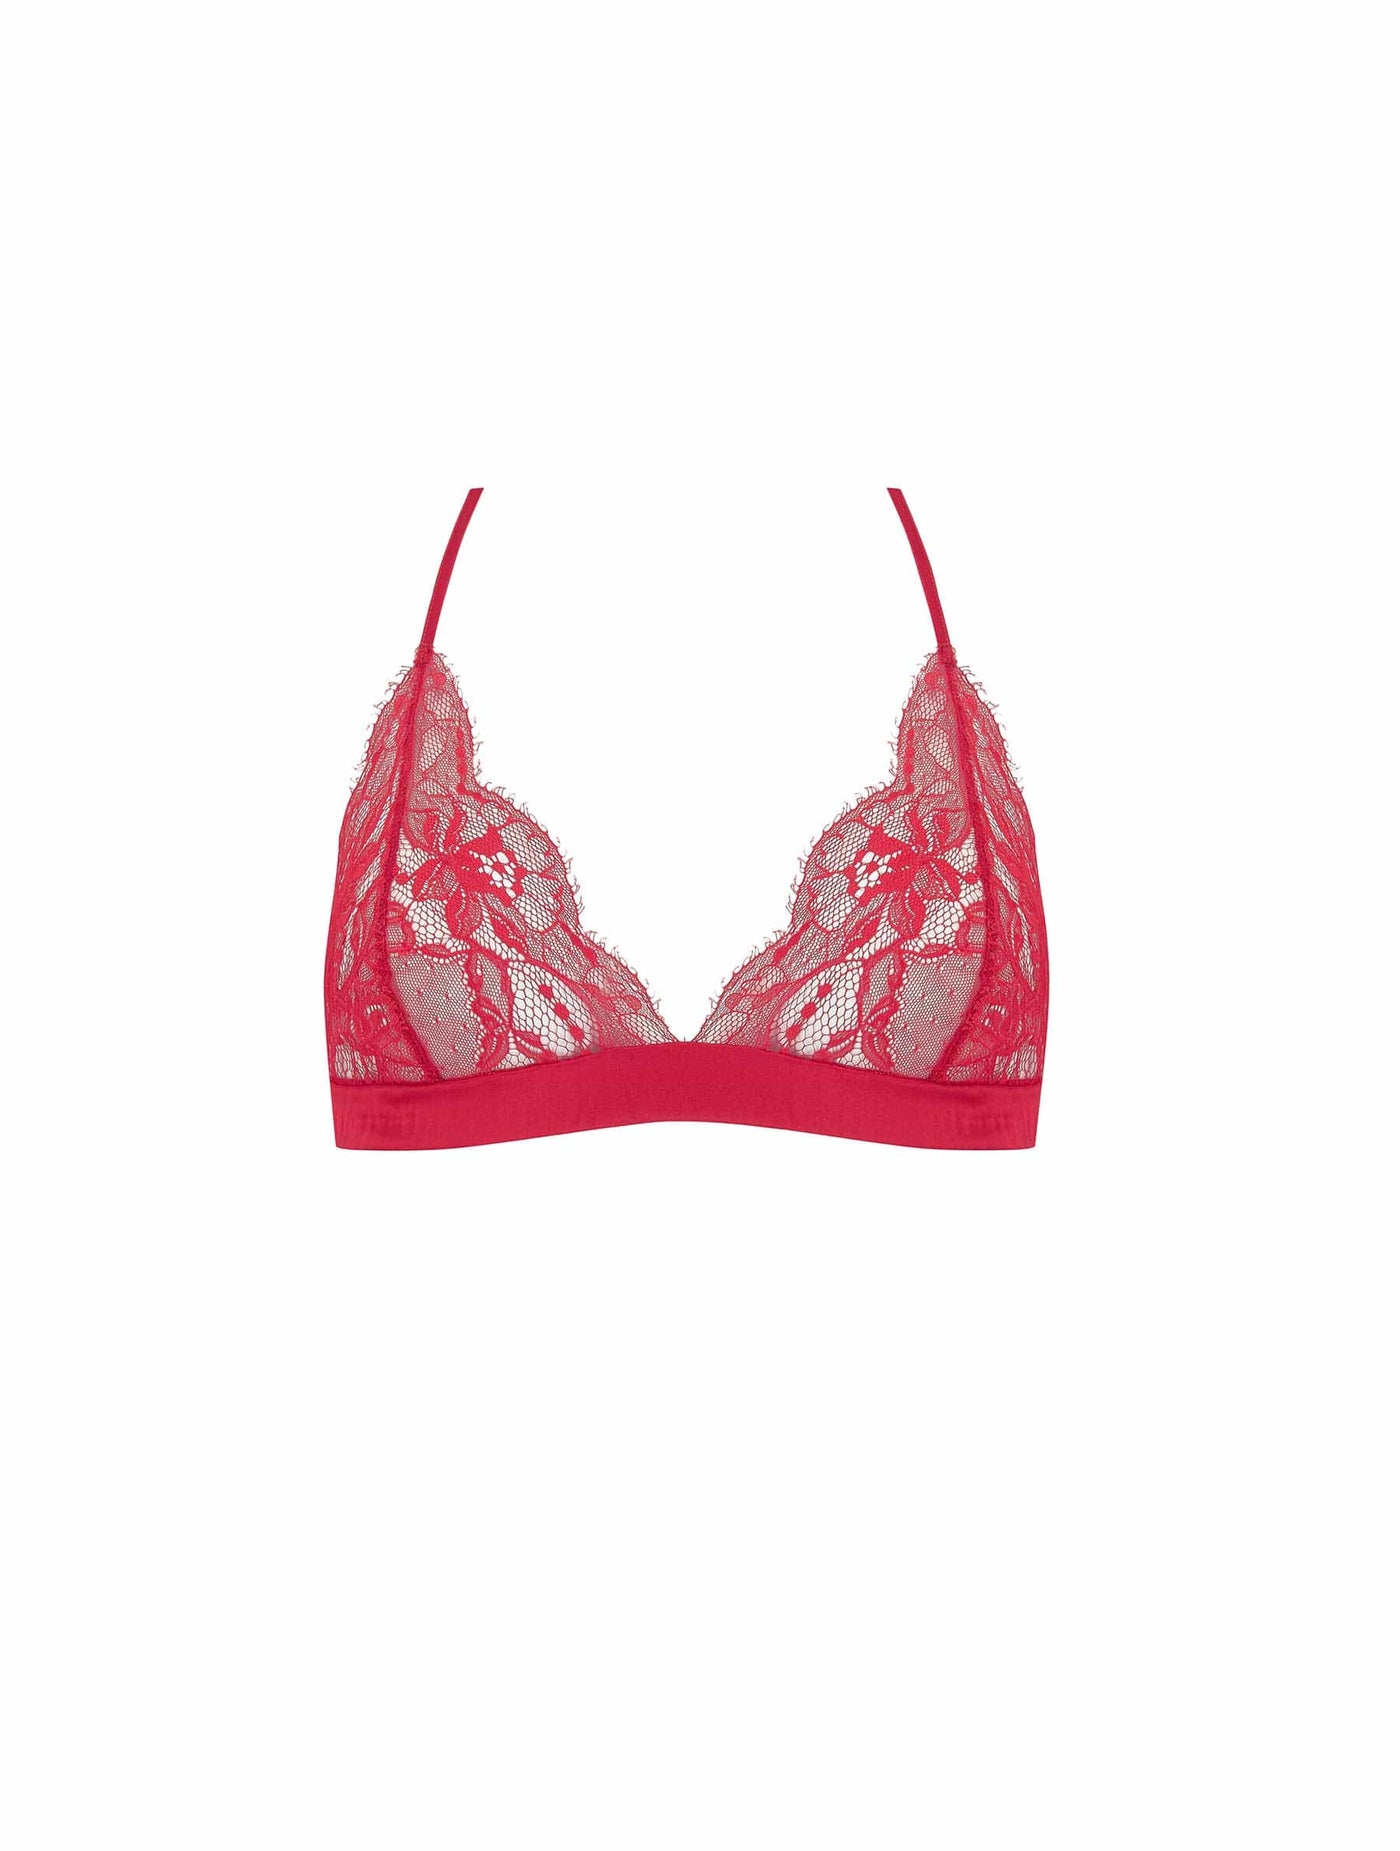 Front of Fleur of England red, lace triangle bra from the Adeline collection.